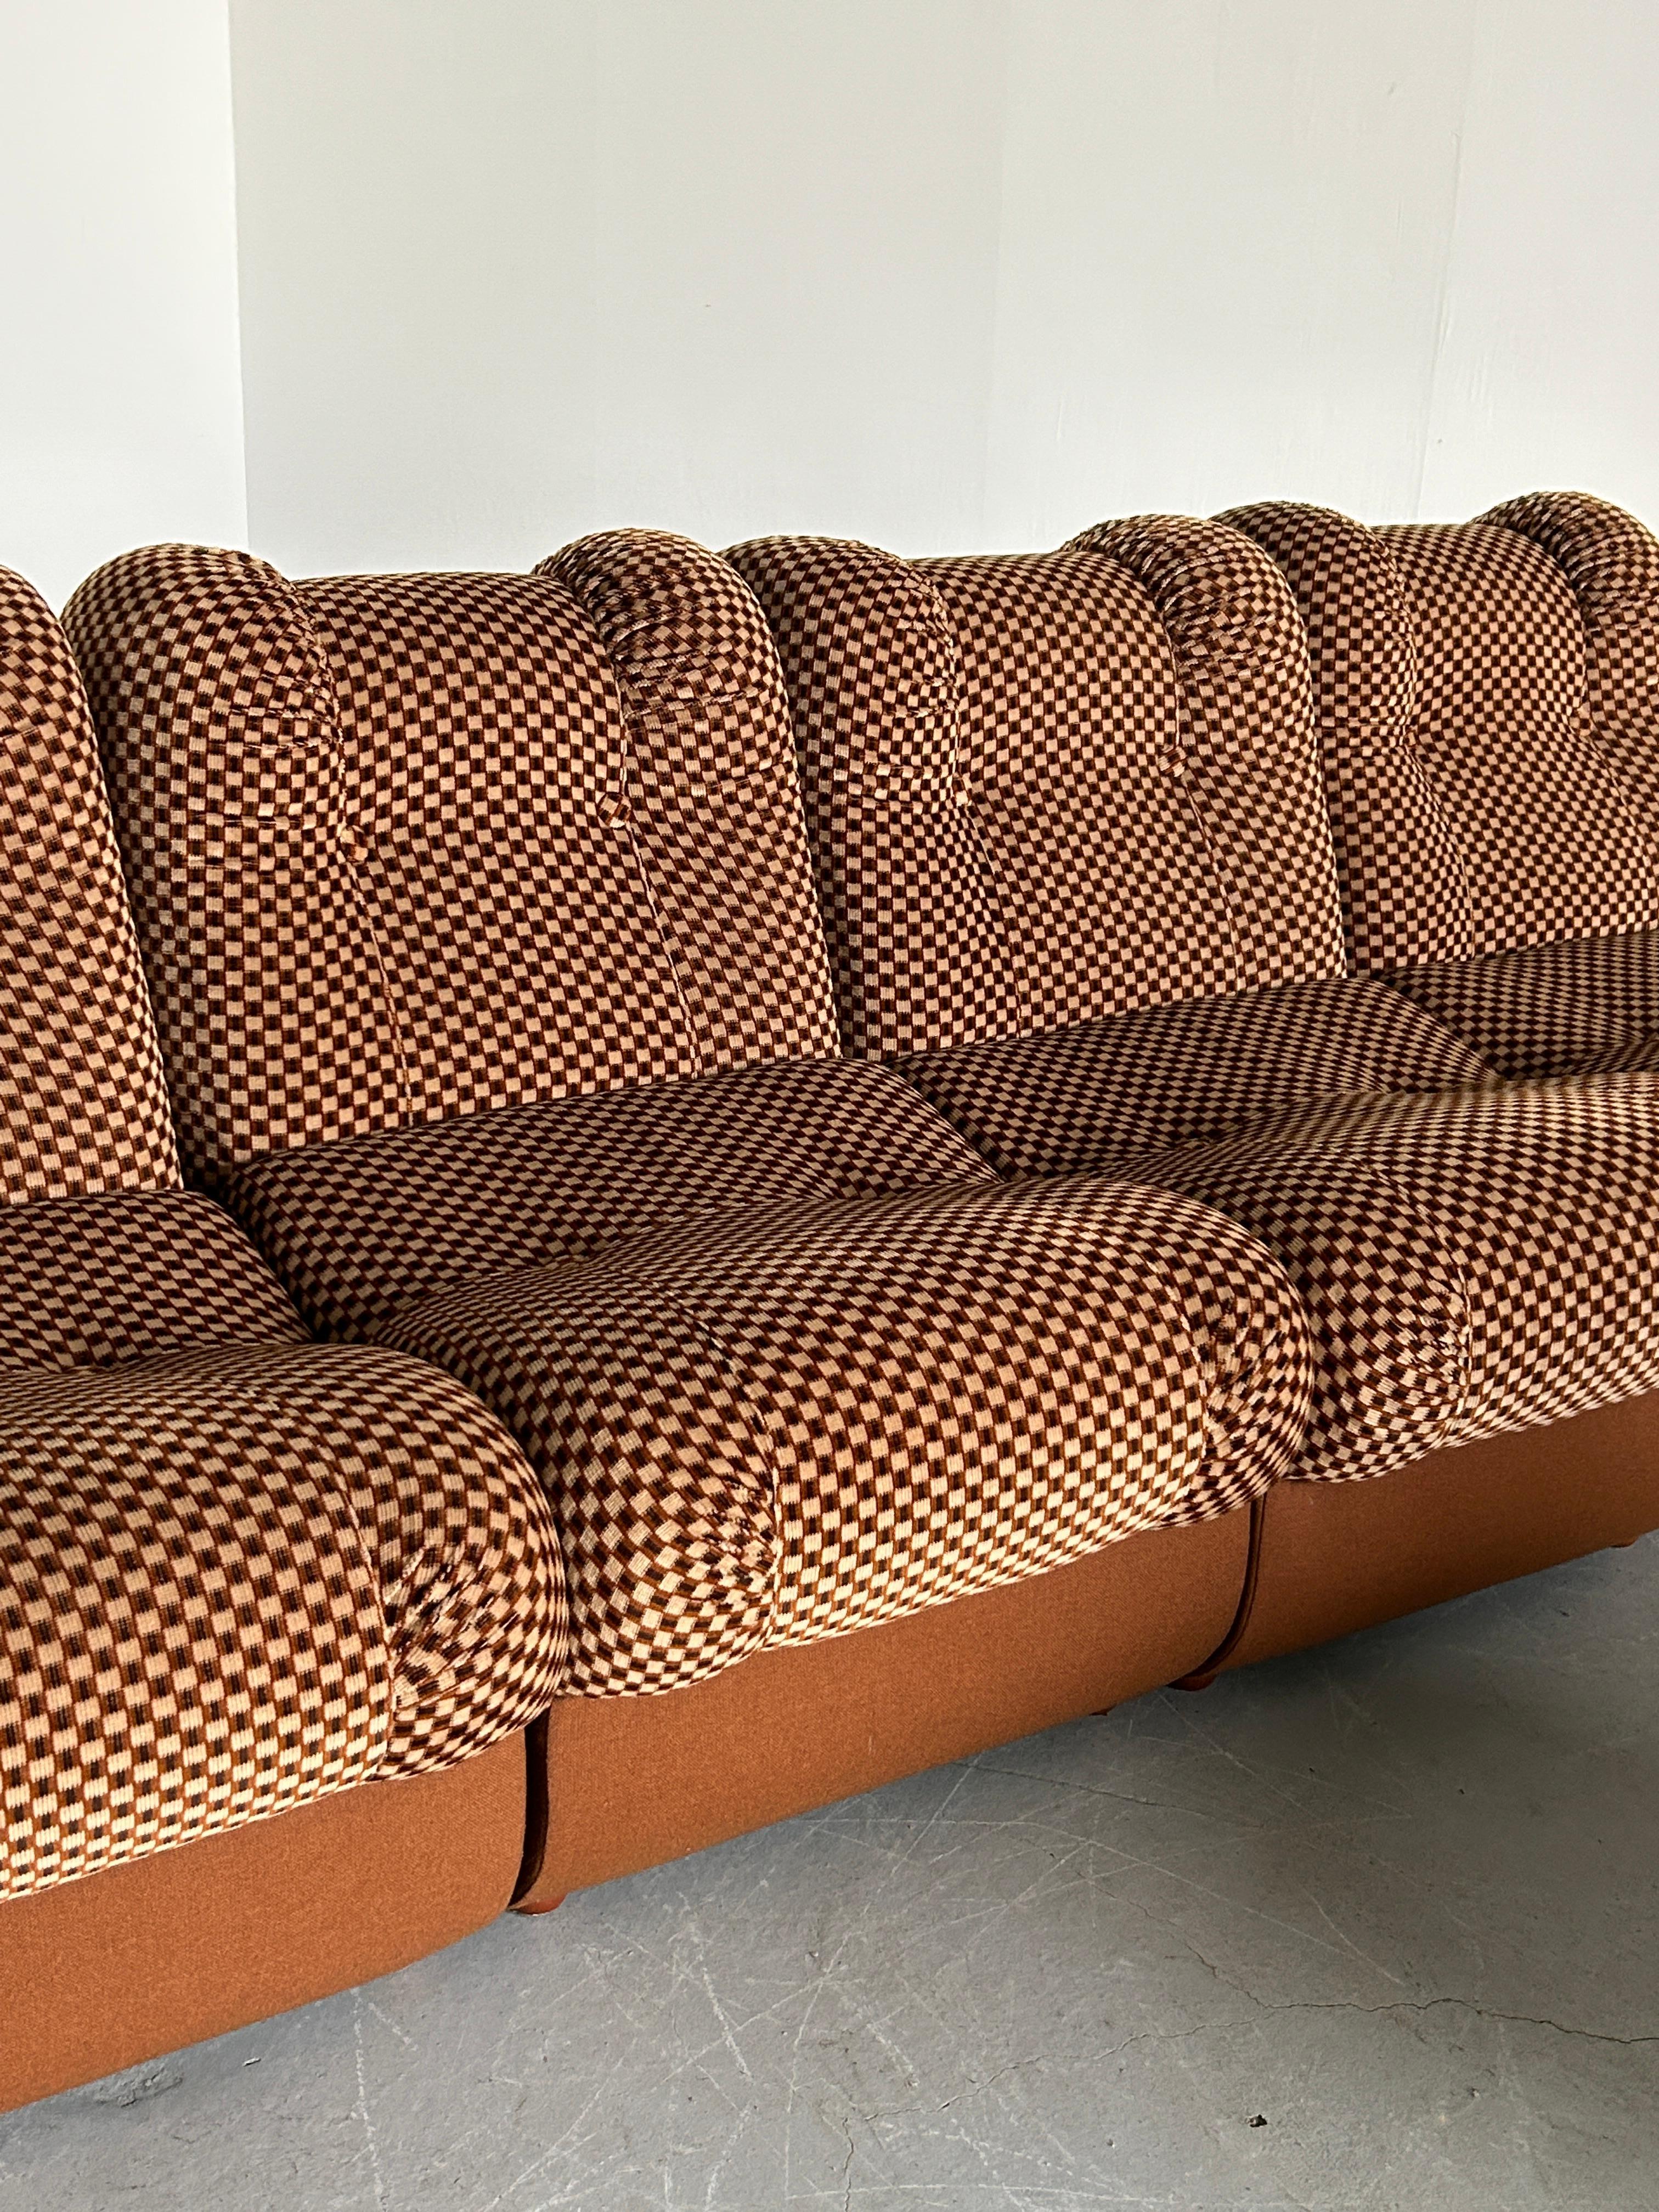 Large Space Age Cloud Modular Sofa Set in Brown Striped Fabric, Italy 1960s For Sale 2